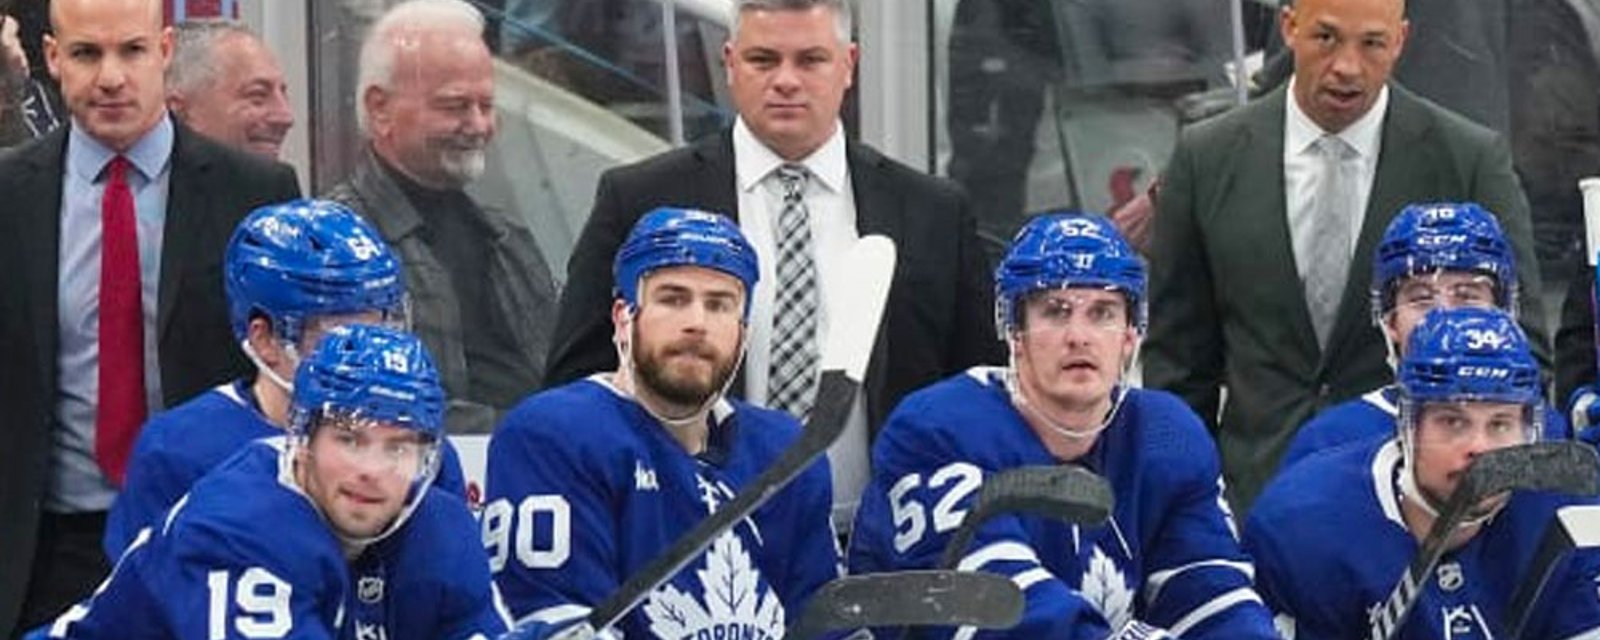 Report: Surprising changes coming for Leafs' coaching staff